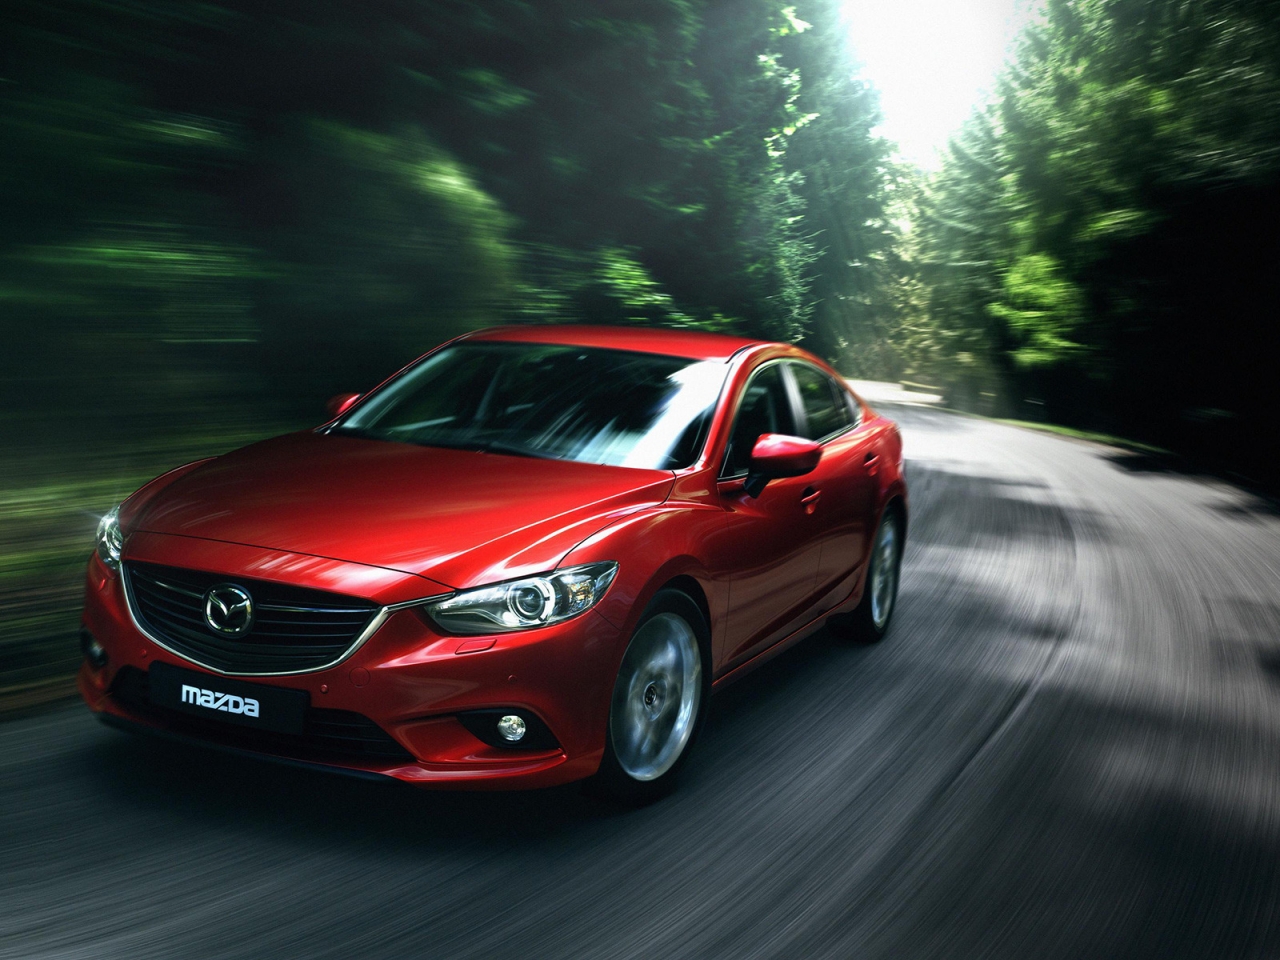 Gorgeous Red Mazda 6 for 1280 x 960 resolution